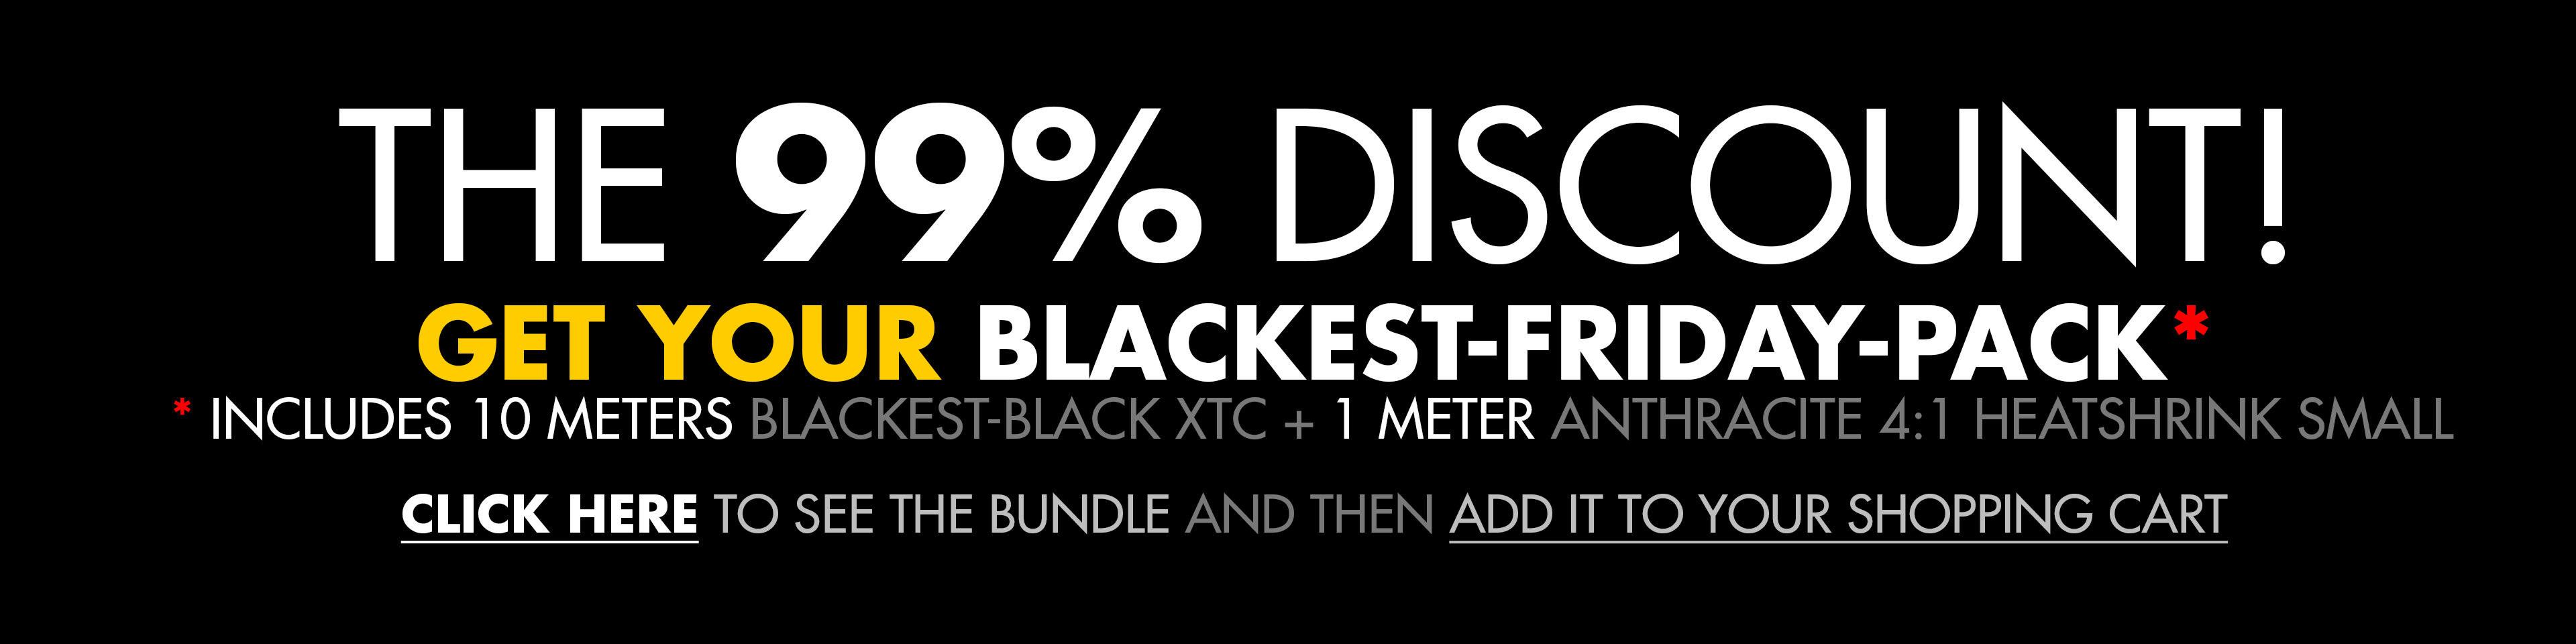 Cyber-week at MDPC-X: The 99% discount! Get your Blackest-Friday-Pack.